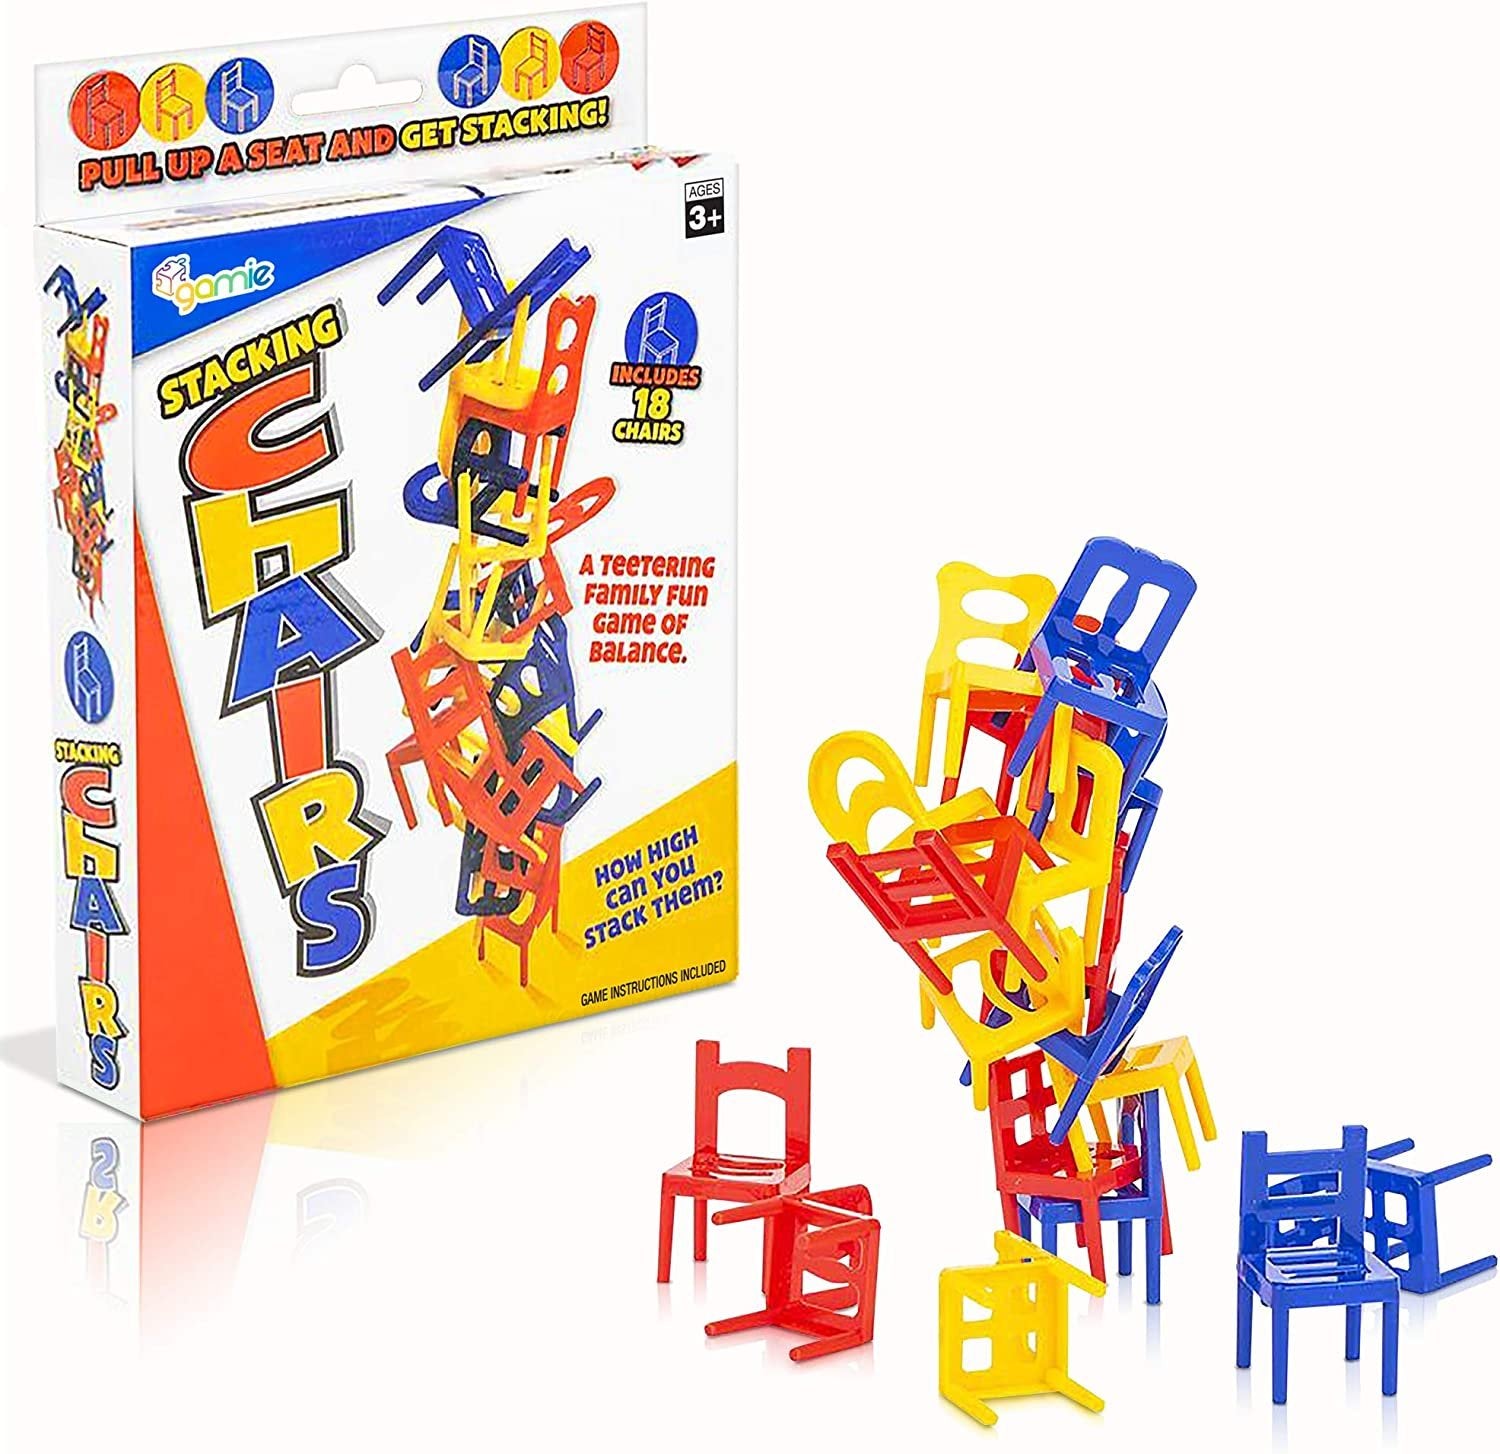 Gamie Balancing Chair Game, 2 Sets, Stacking Chair Games with 18 Mini Chairs & Instruction Guide, New Family Game Night Games for Children, Development Learning Game for Coordination & Balance